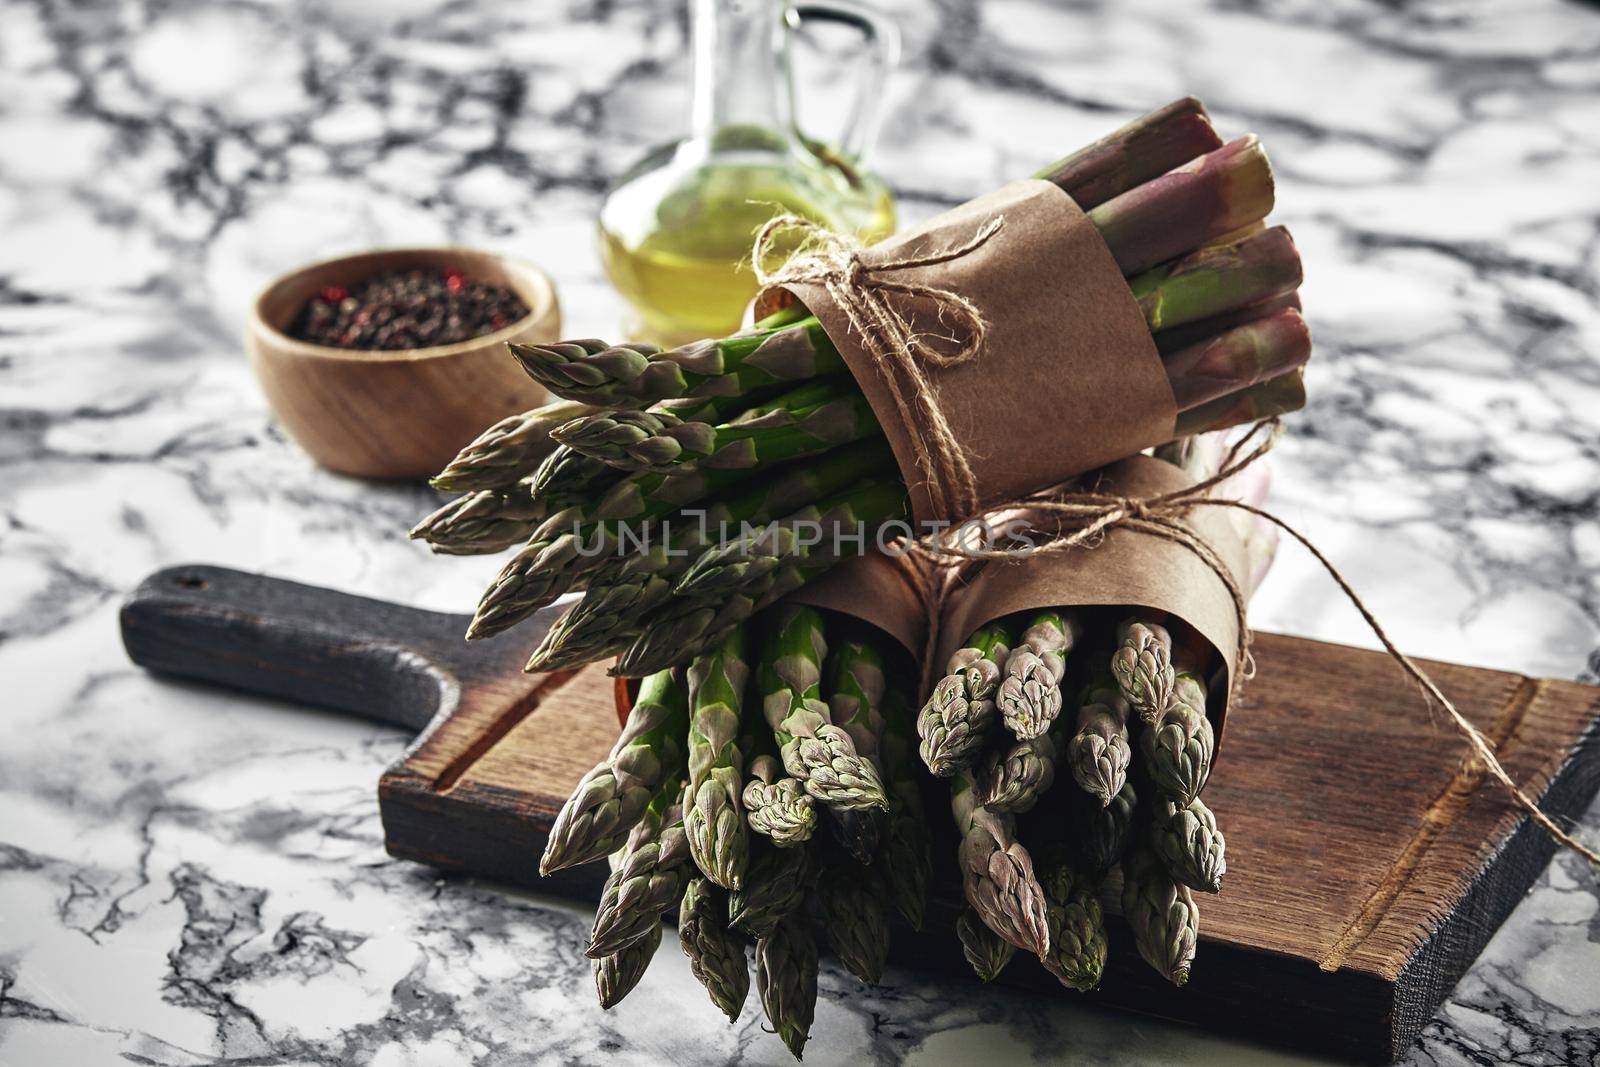 Bunch of an edible, green spears of asparagus on a wooden board, marble background. Fresh vegetables with olive oil and seasonings, top view. Healthy eating. Spring harvest, agricultural farming concept.